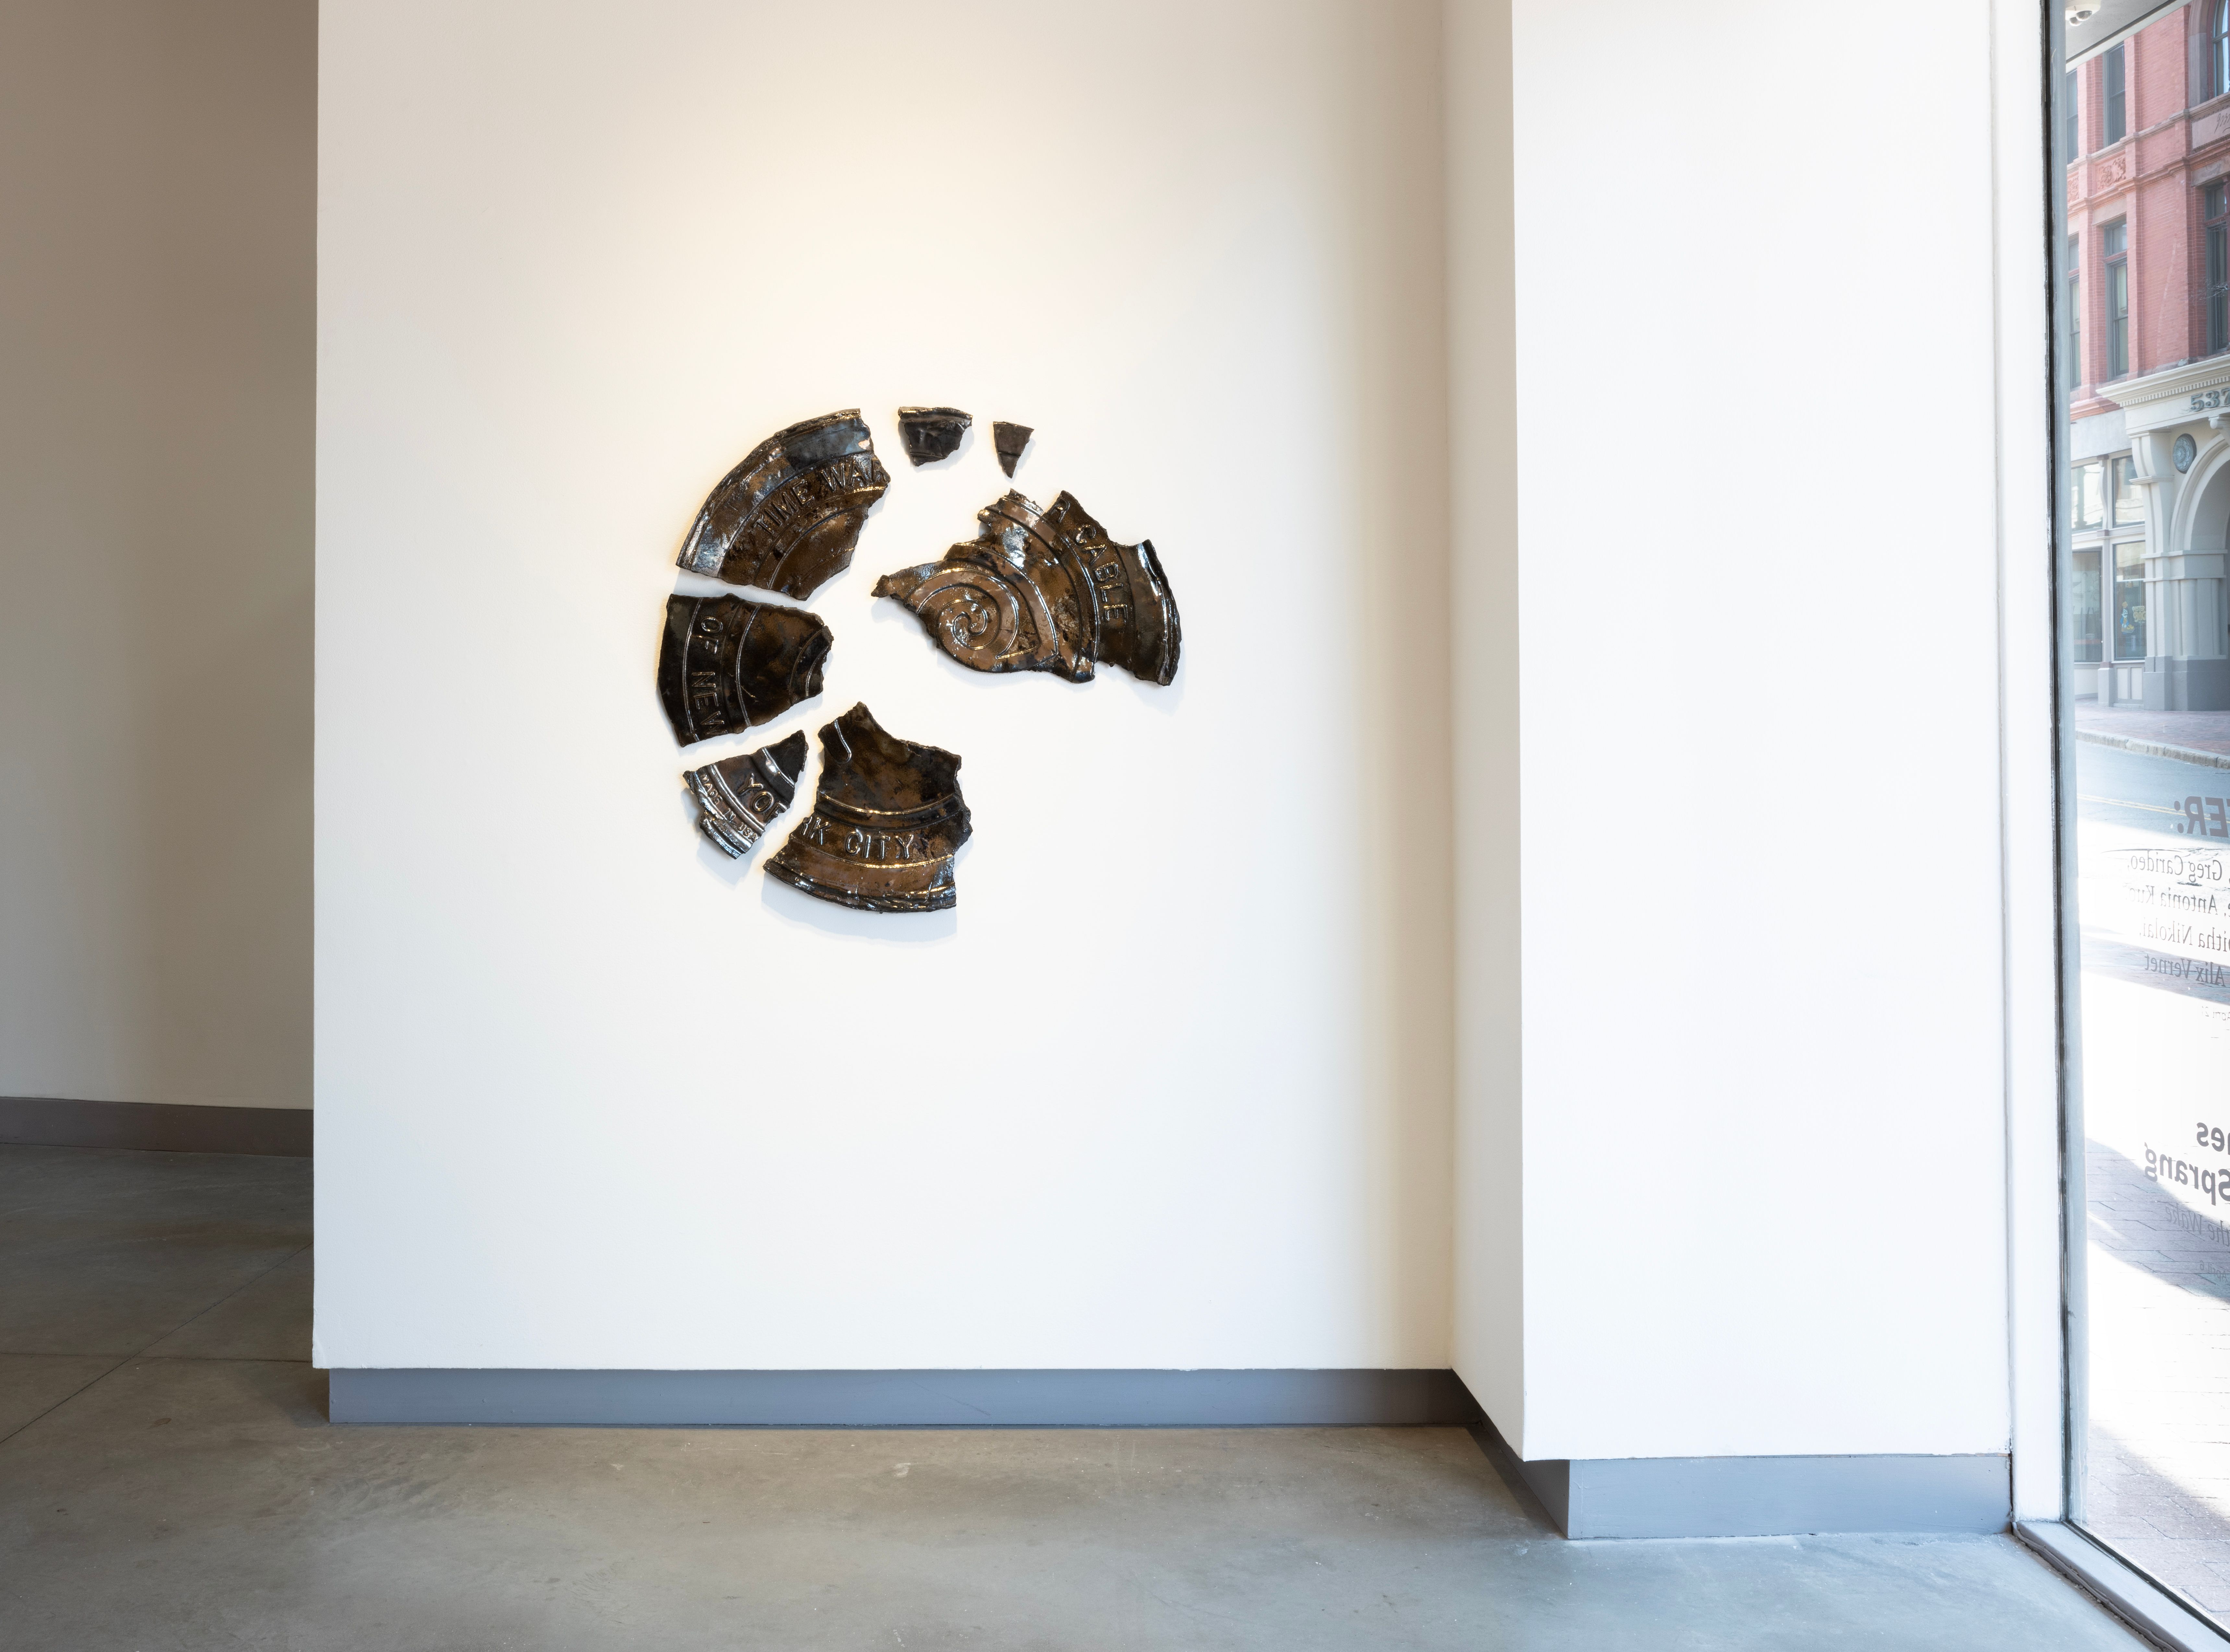 Installation view of a ceramic sculpture that resembles a brown broken circle.